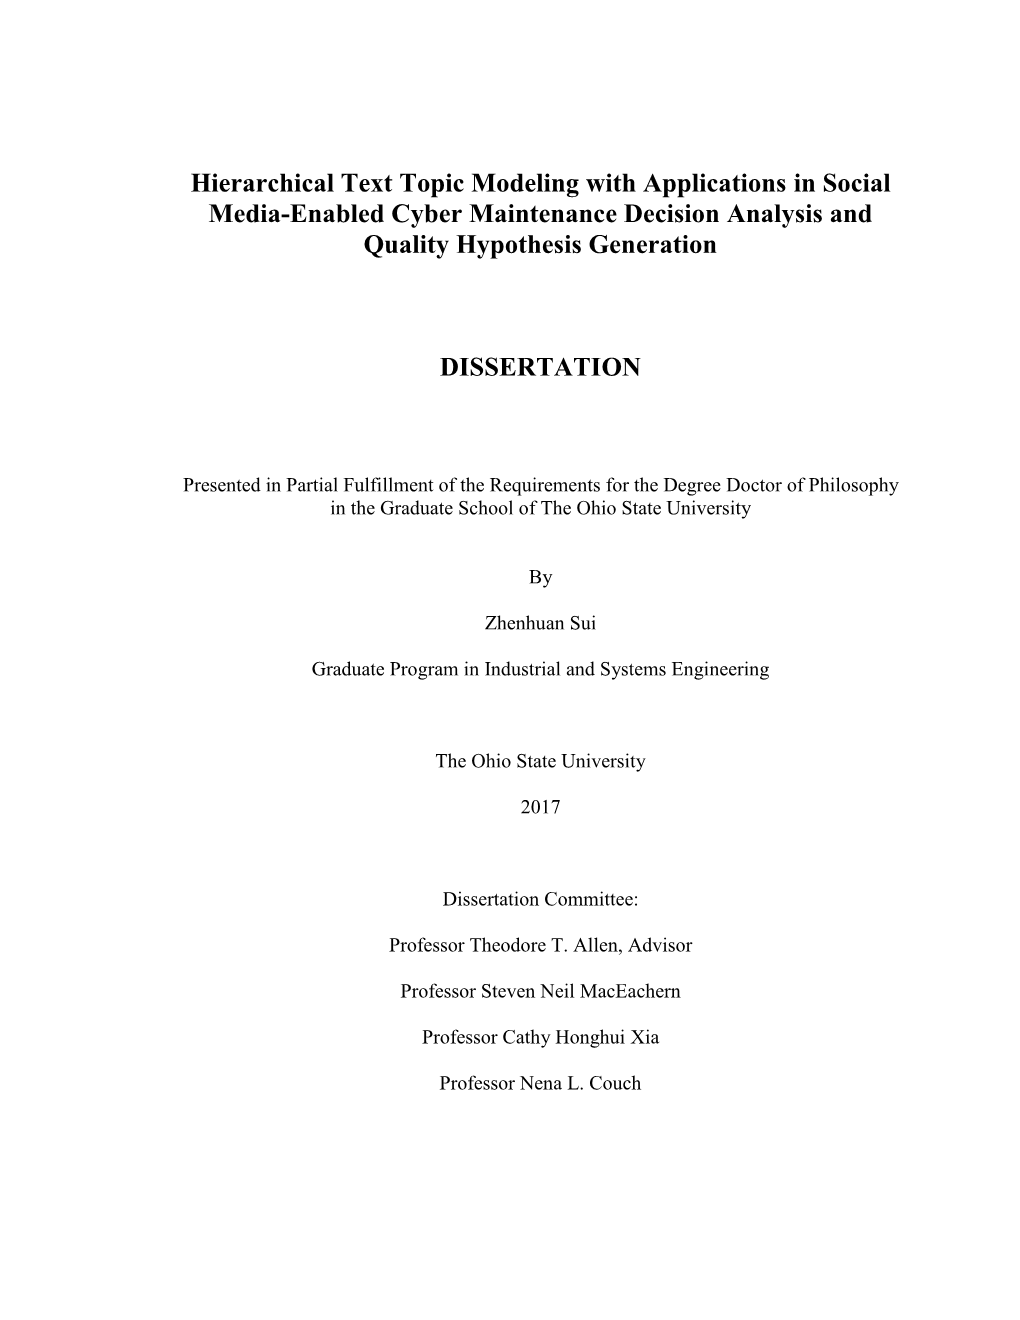 Hierarchical Text Topic Modeling with Applications in Social Media-Enabled Cyber Maintenance Decision Analysis and Quality Hypothesis Generation